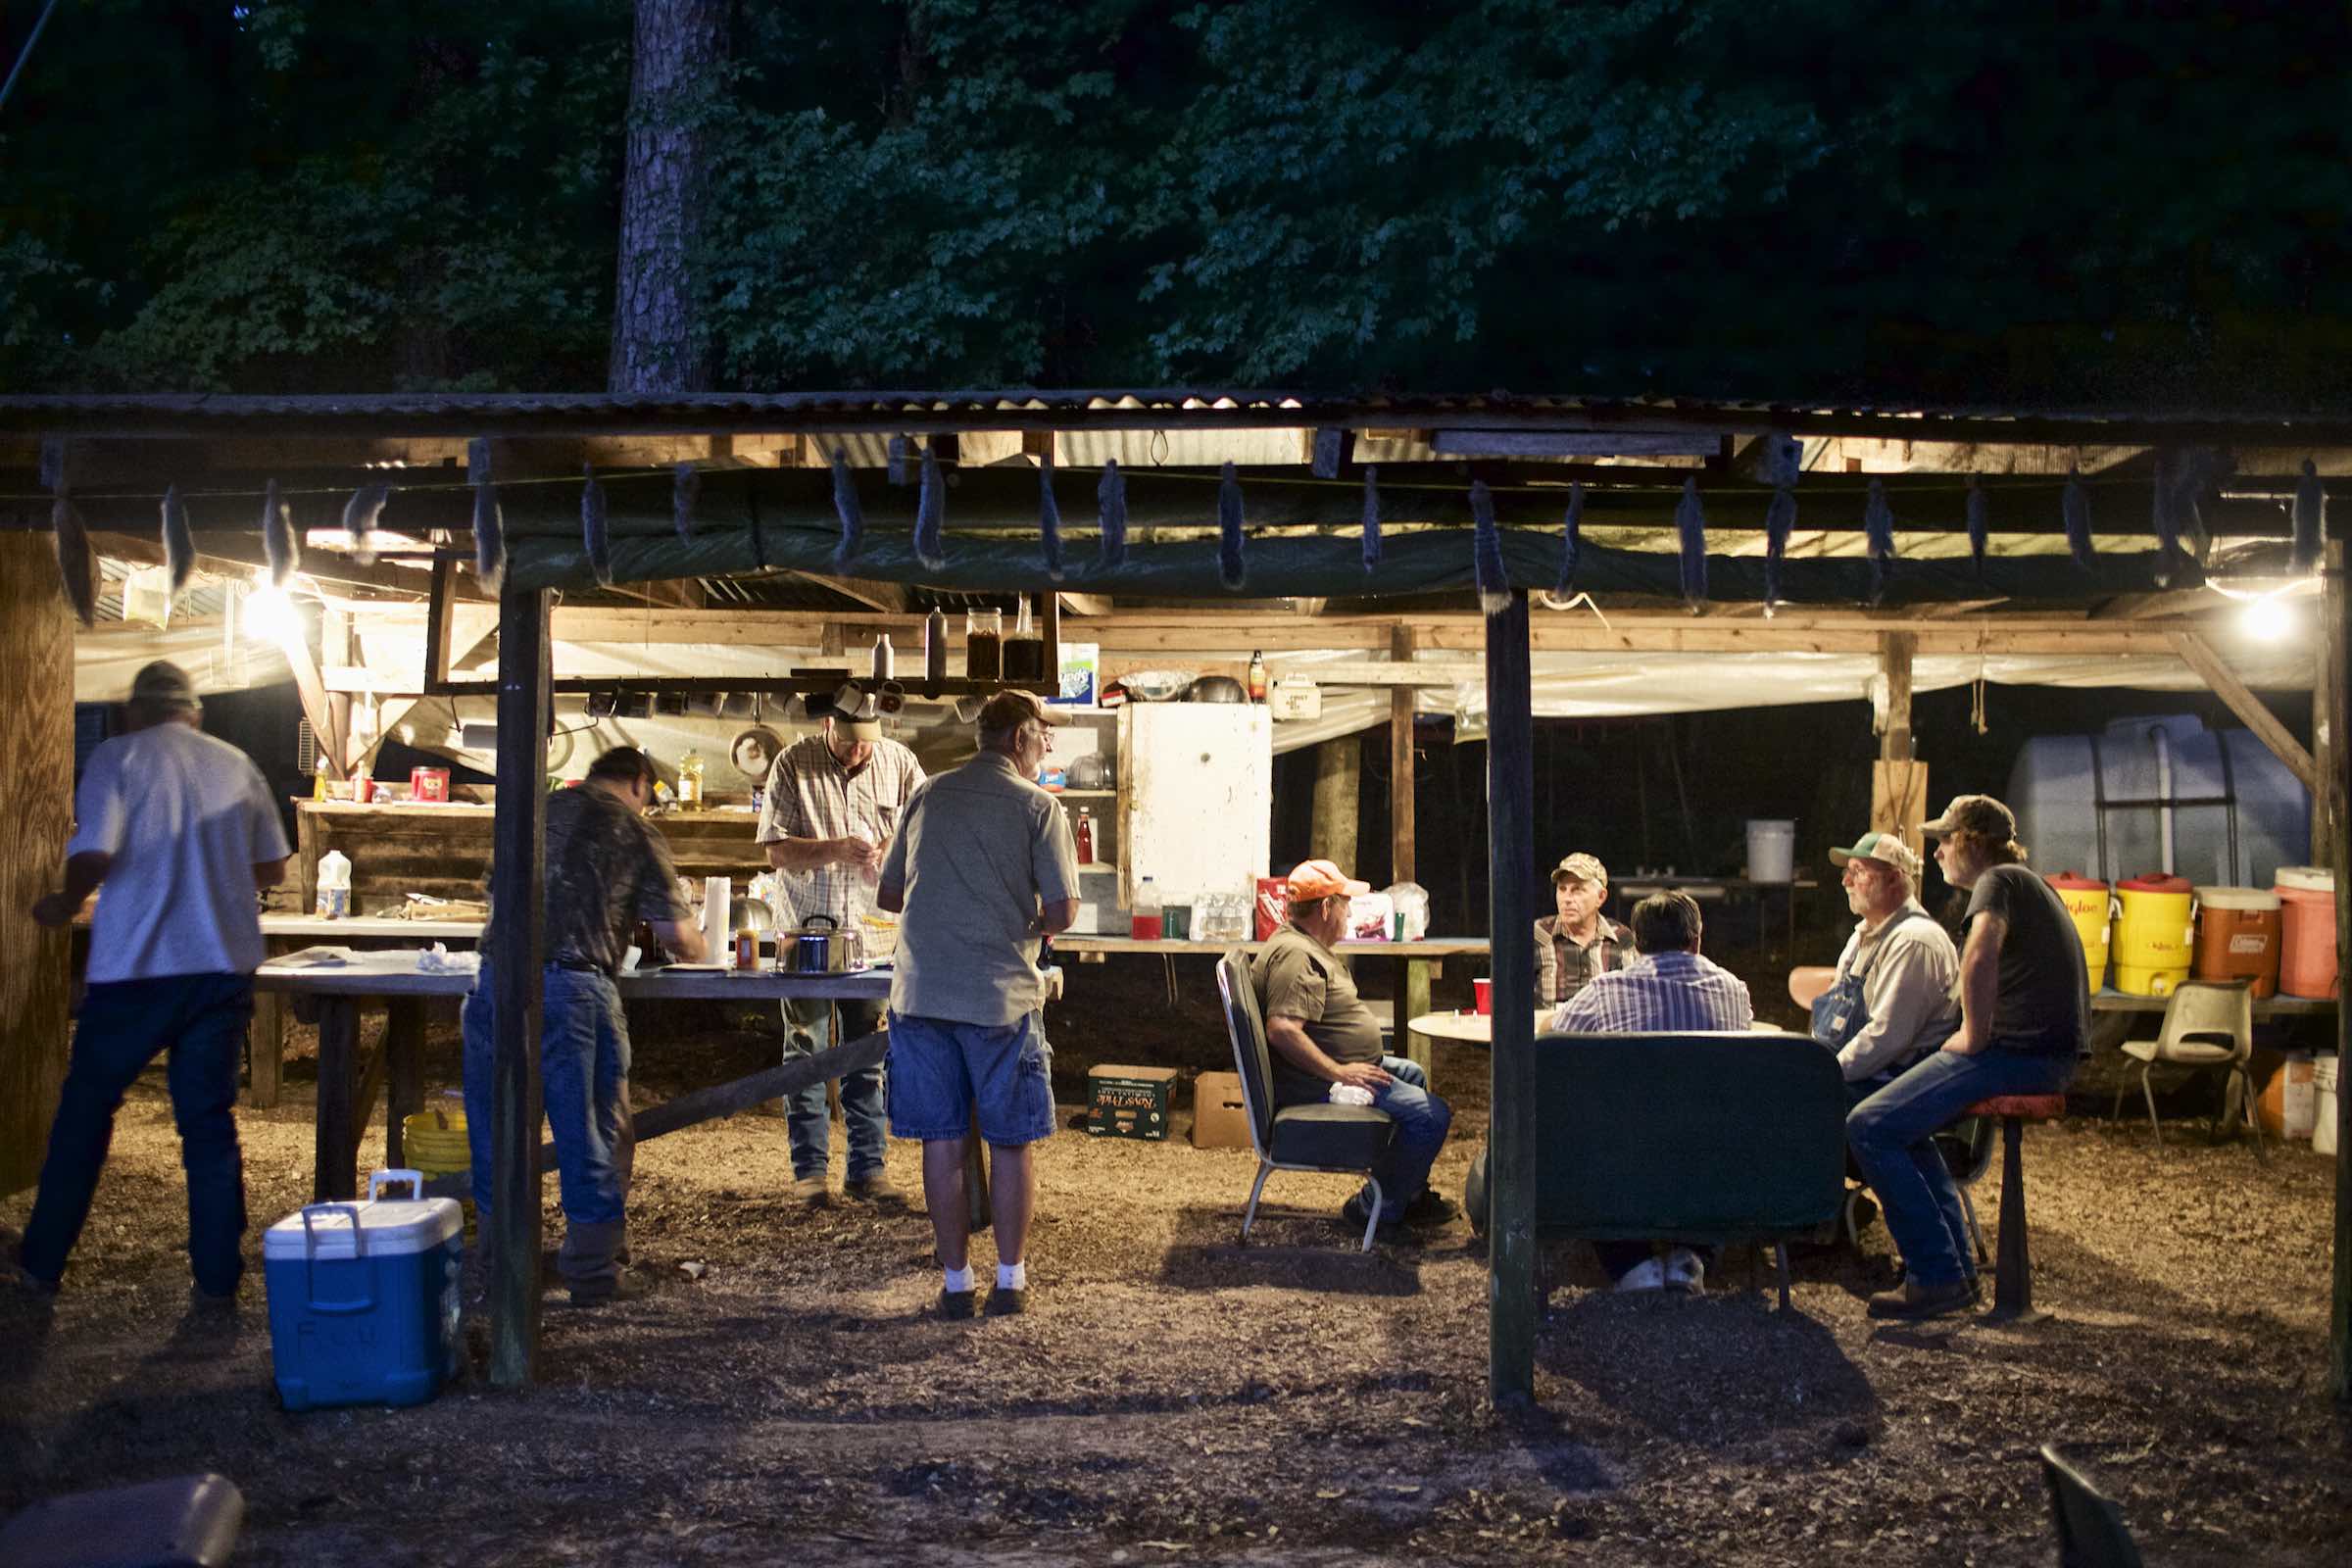 Jody Horton Photography - Hunters cooking and drinking in an open camp kitchen in the early morning.